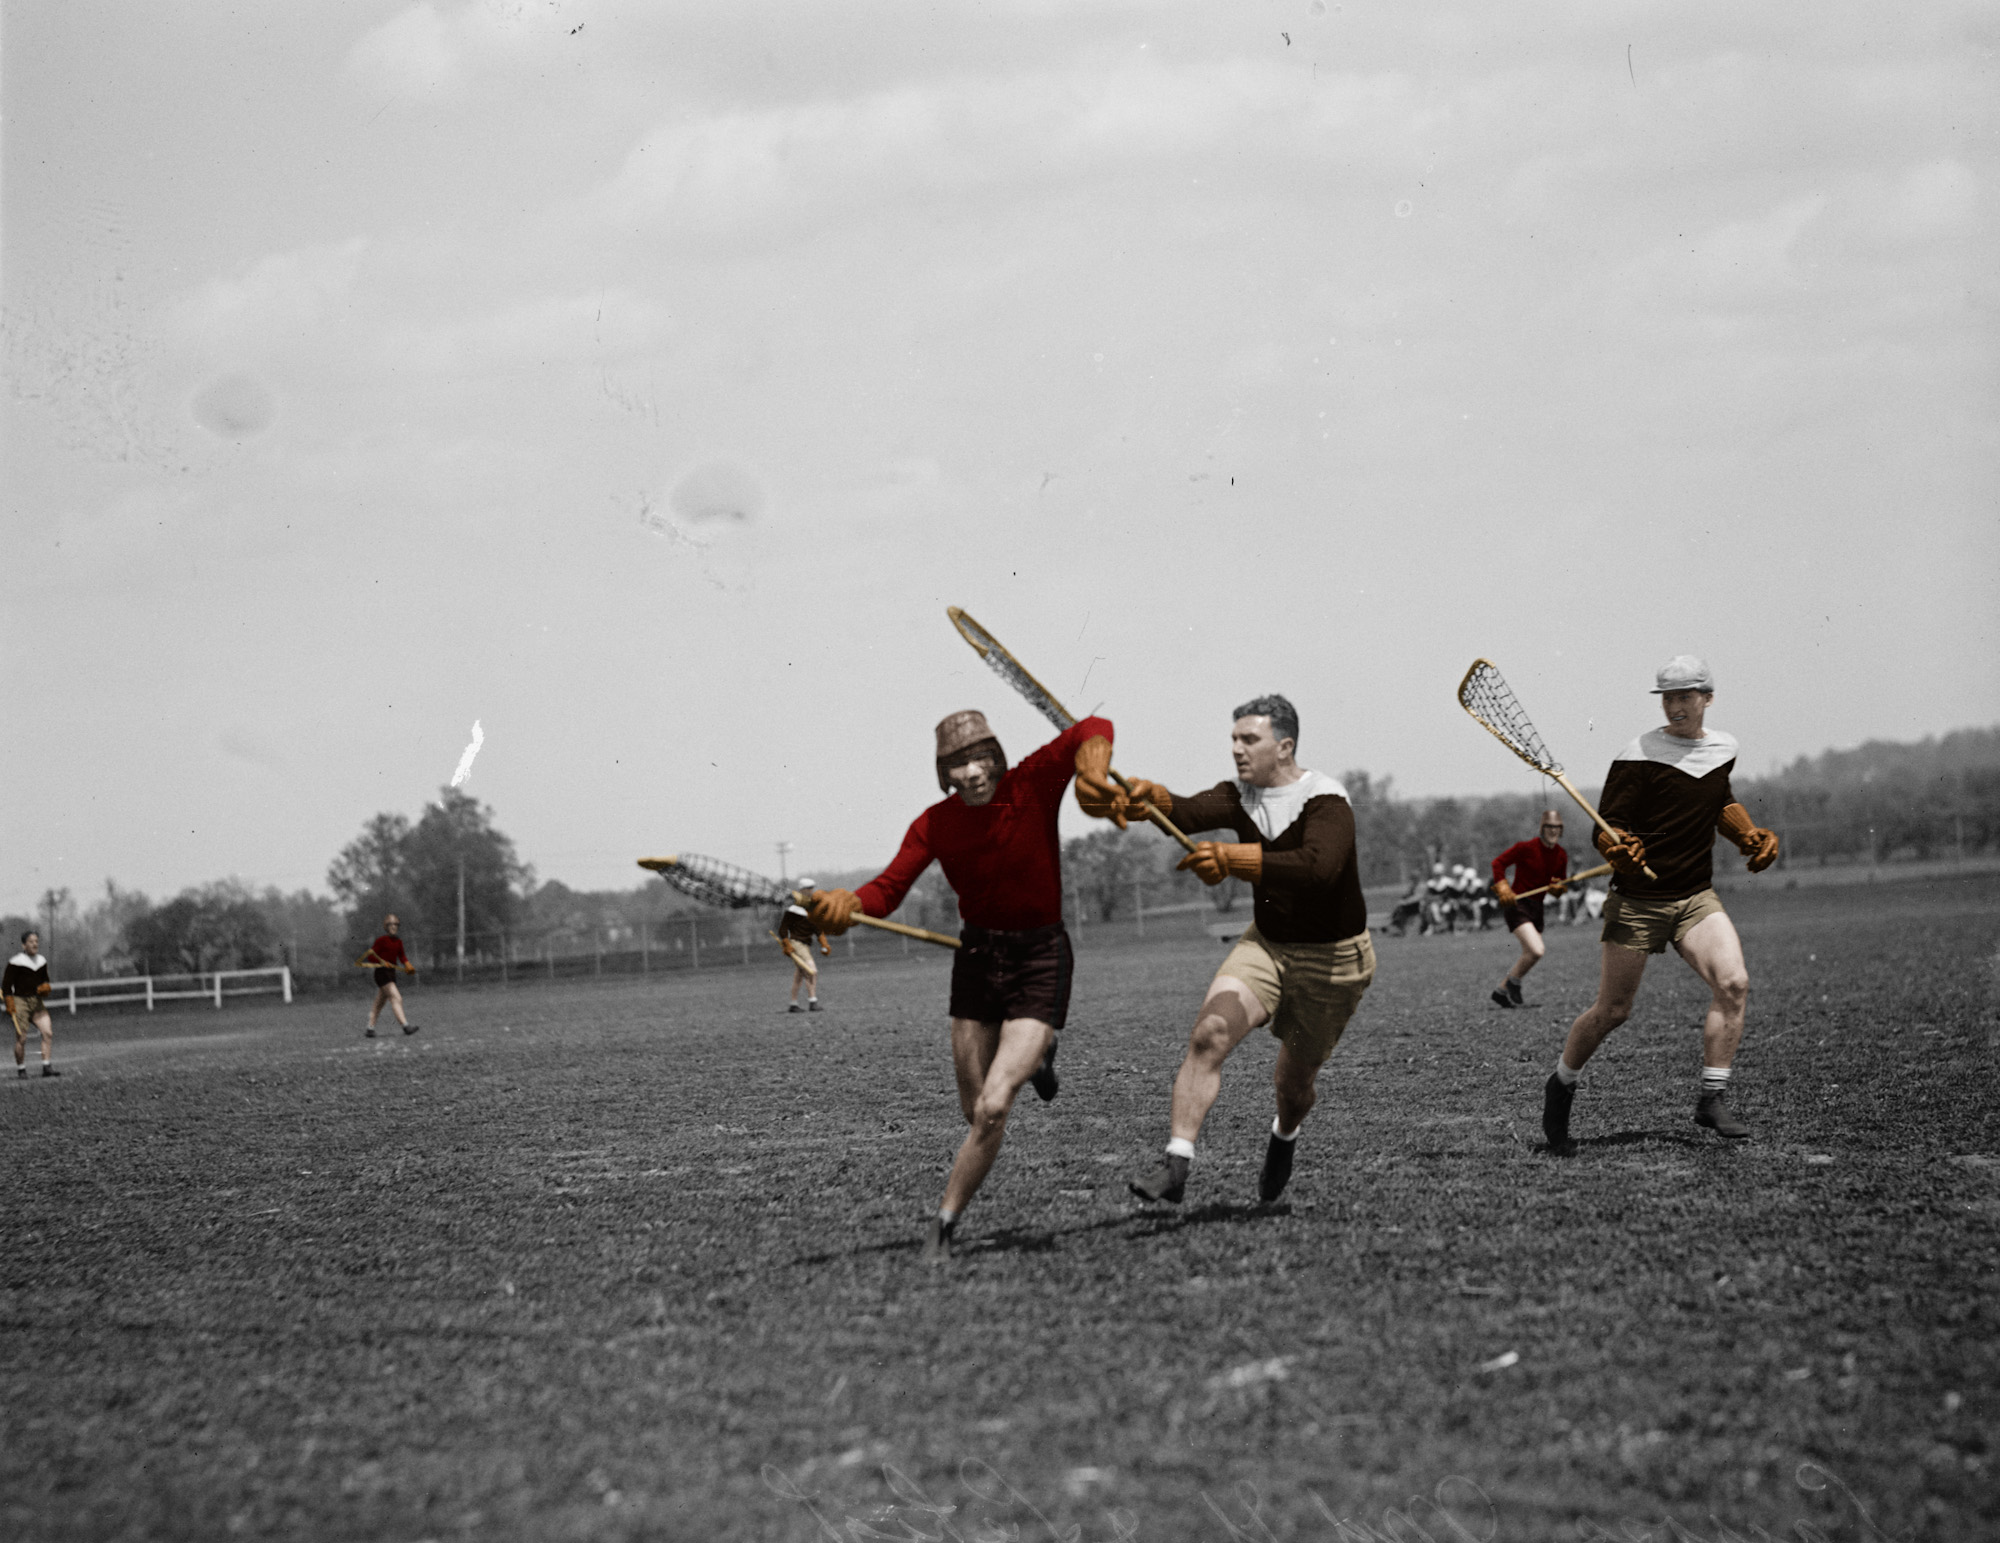 A colorized version of a picture of a lacrosse match between Maryland and Lehigh in 1925.

I could not find any information as to which team wore which uniforms or what the colors were back then so I took the modern colors for each school and assigned them as I saw fit.

Maryland currently has Red, White, Gold, and Black so I assigned those colors to the team with the dark jerseys.  There is also a picture of a Maryland player from 1924 whose uniform closely matches this set.

Lehigh has Brown and White which I assigned to the team with the white shouldered jerseys. View full size.